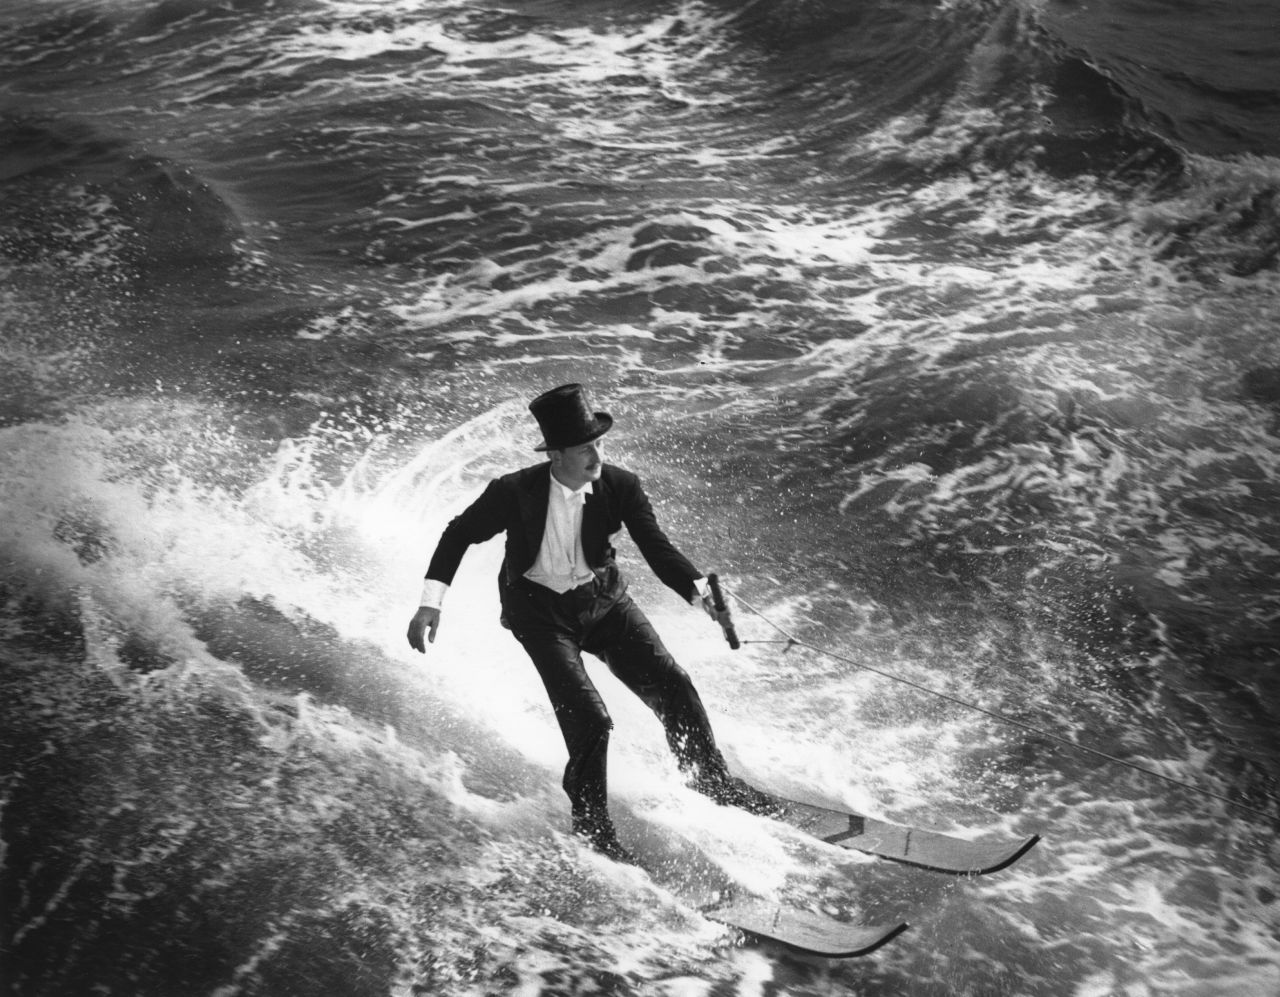 Named "The dashing, splashing father of water skiing" by <a href="https://www.si.com/vault/1987/08/10/115909/the-dashing-splashing-father-of-waterskiing" target="_blank">Sports Illustrated</a>, an 18-year-old Ralph Samuelson "unwittingly" invented water skiing on Lake Pepin, Minnesota, in 1922 (not pictured). Already partial to riding a board off the back of his brother's powerboat, Samuelson also partook in winter sports. He tried snow skis on the lake and promptly sank. He tried other modifications to no avail until he increased the skis' surface area, using two 8-foot by 9-inch pine planks. He added leather foot straps, held on to an iron ring tied to a 100-foot tow rope and, after trying a few starting positions, he was off.